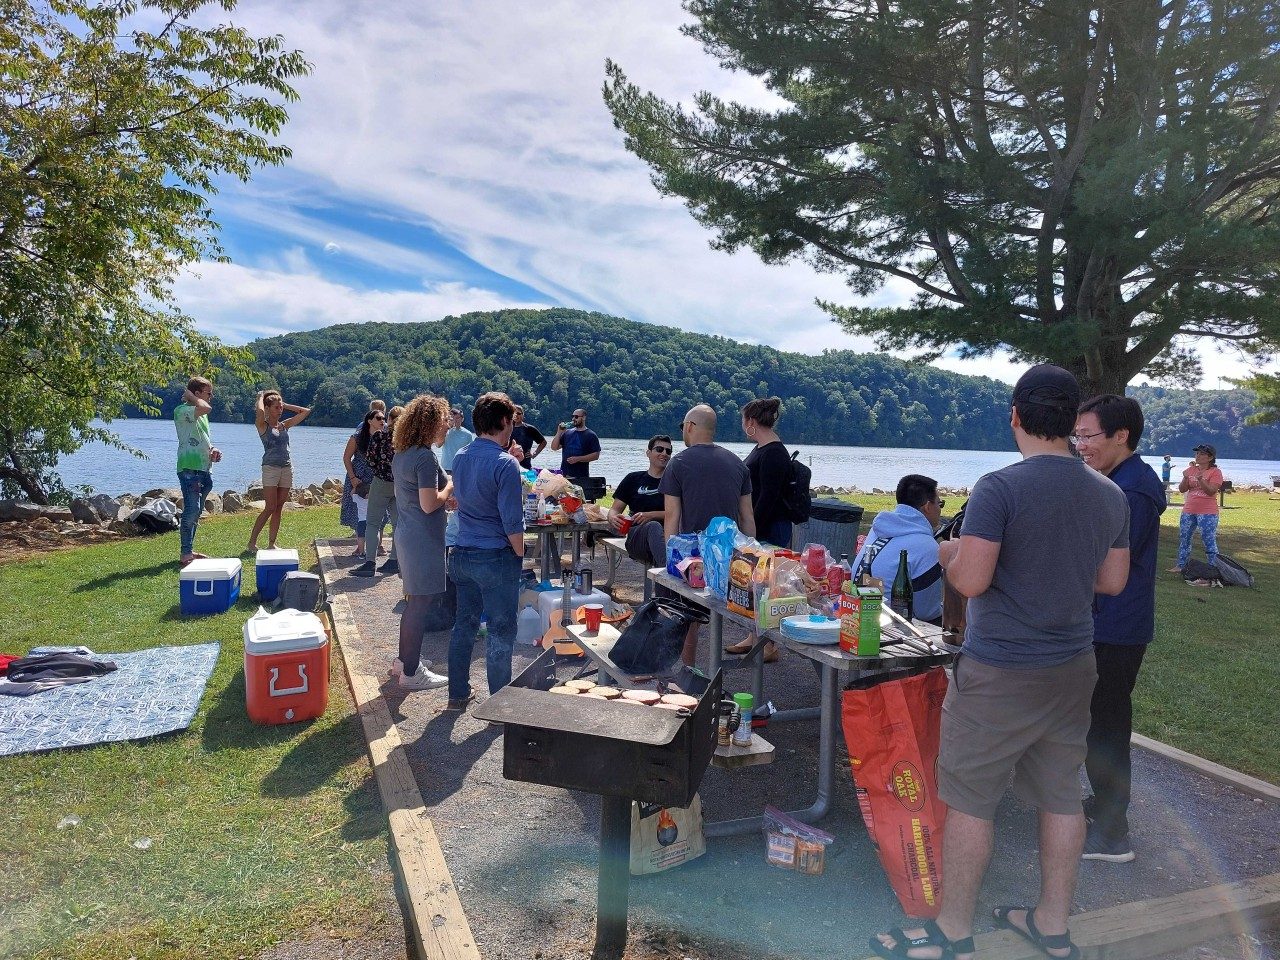 As part of National Postdoctoral Appreciation Week in 2021, the Virginia Tech  Postdoc Association held an outing and cookout at Claytor Lake State Park.